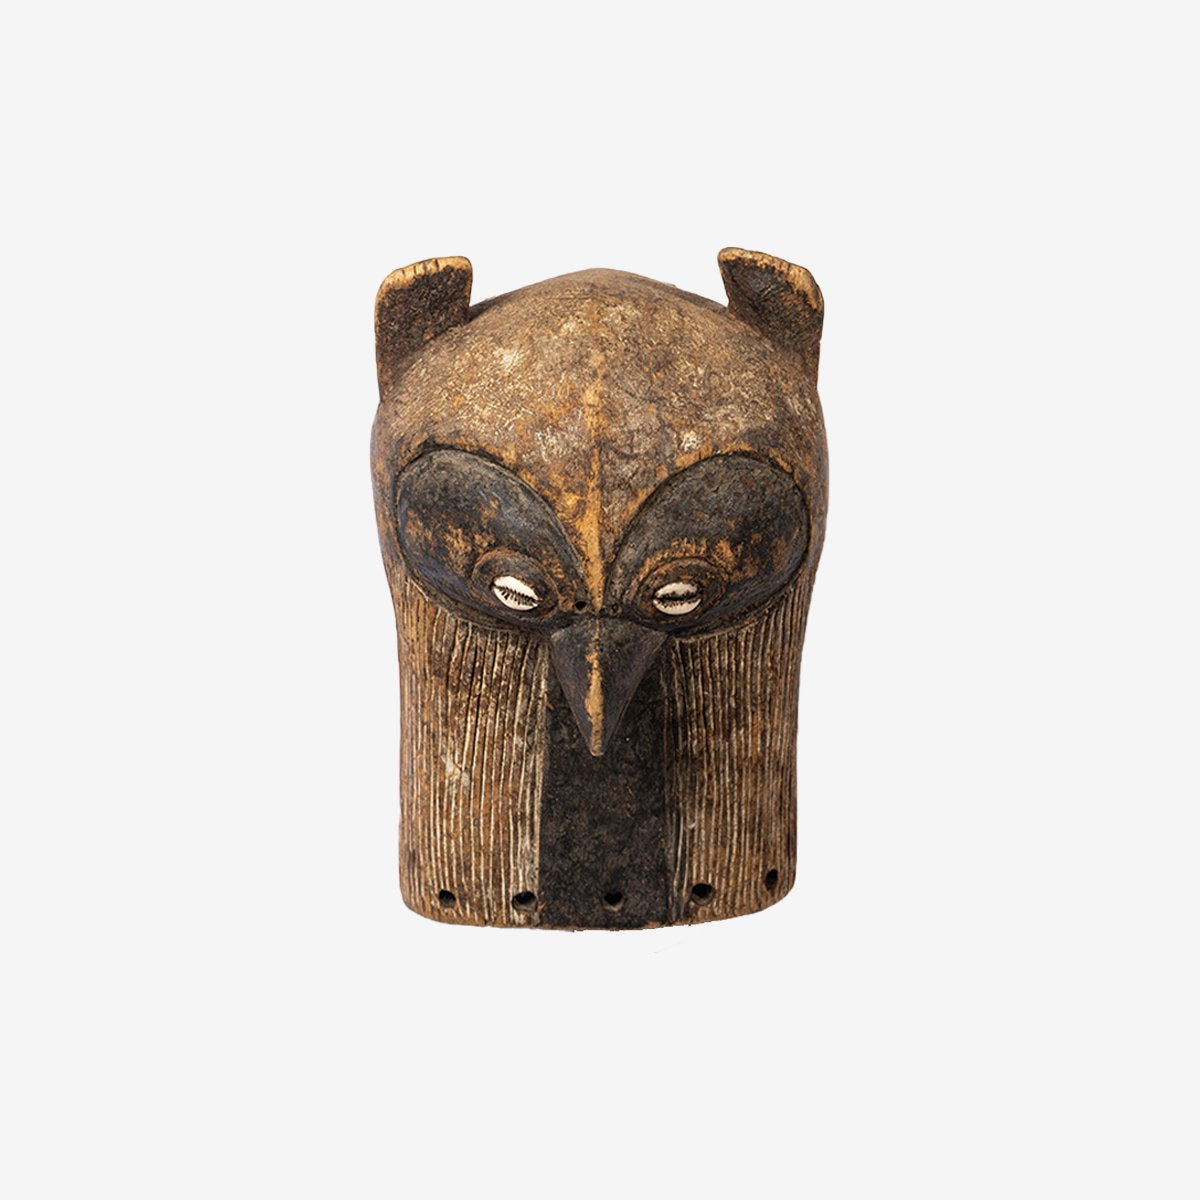 Luba Mask - Authentic African handicrafts | Clothing, bags, painting, toys & more - CULTURE HUB by Muthoni Unchained